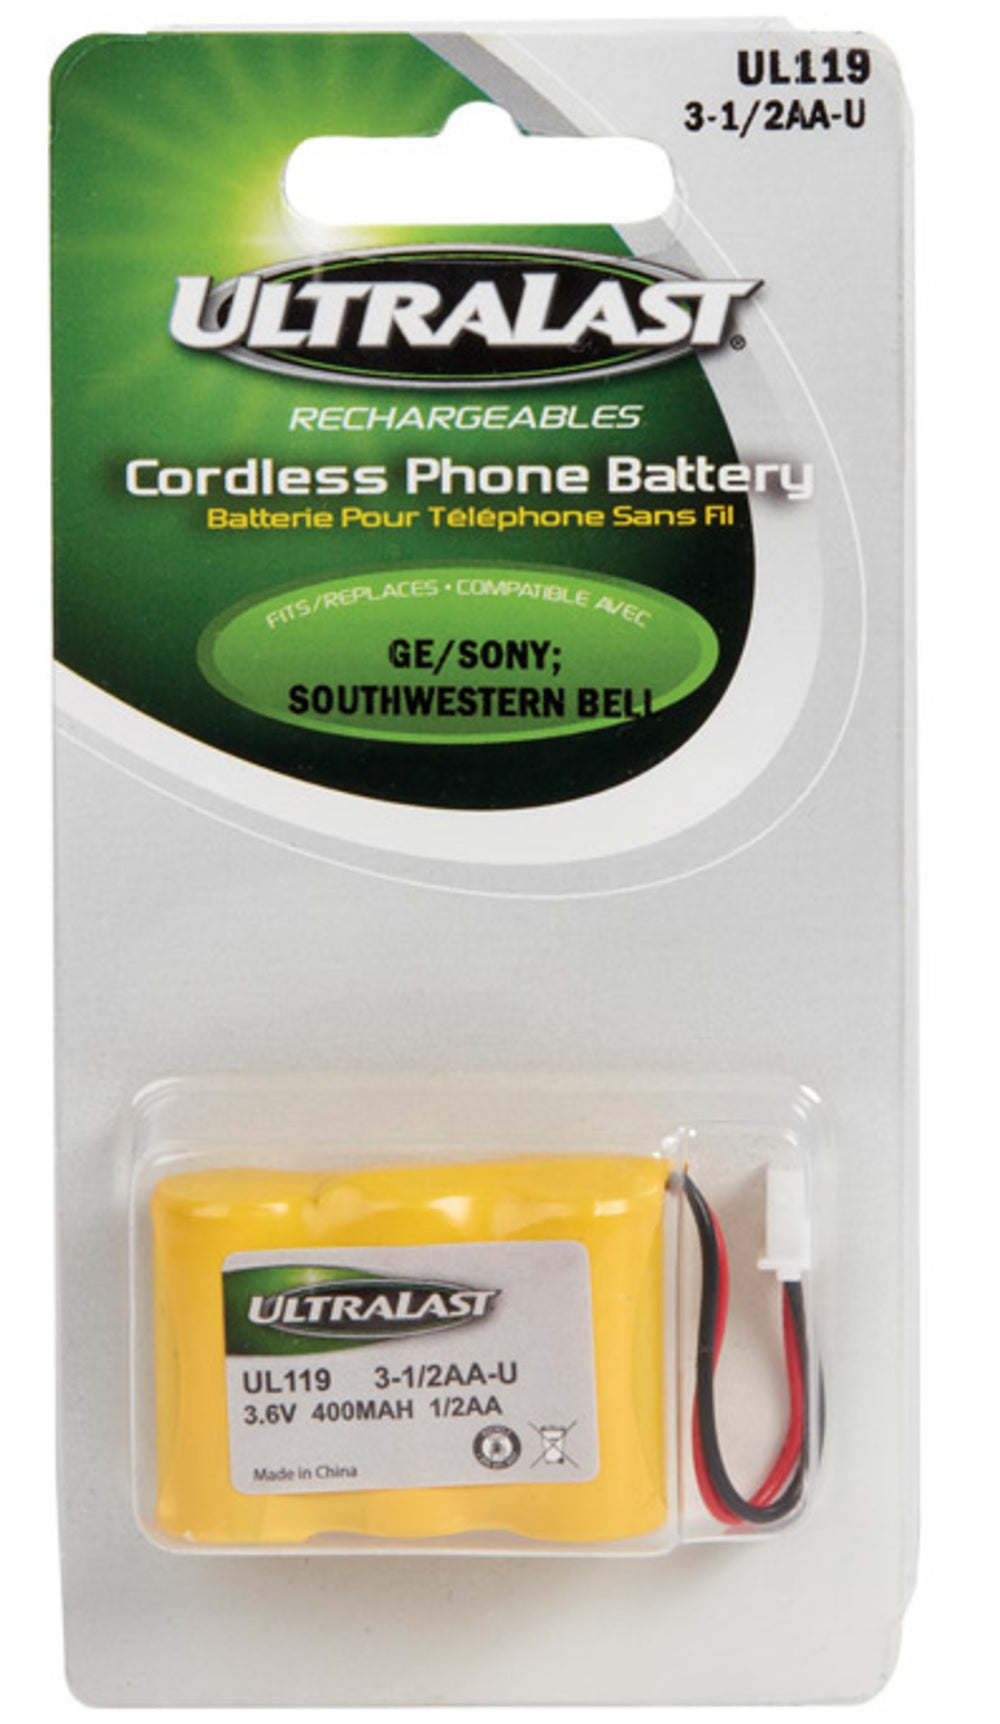 buy cordless phone batteries at cheap rate in bulk. wholesale & retail electrical goods store. home décor ideas, maintenance, repair replacement parts